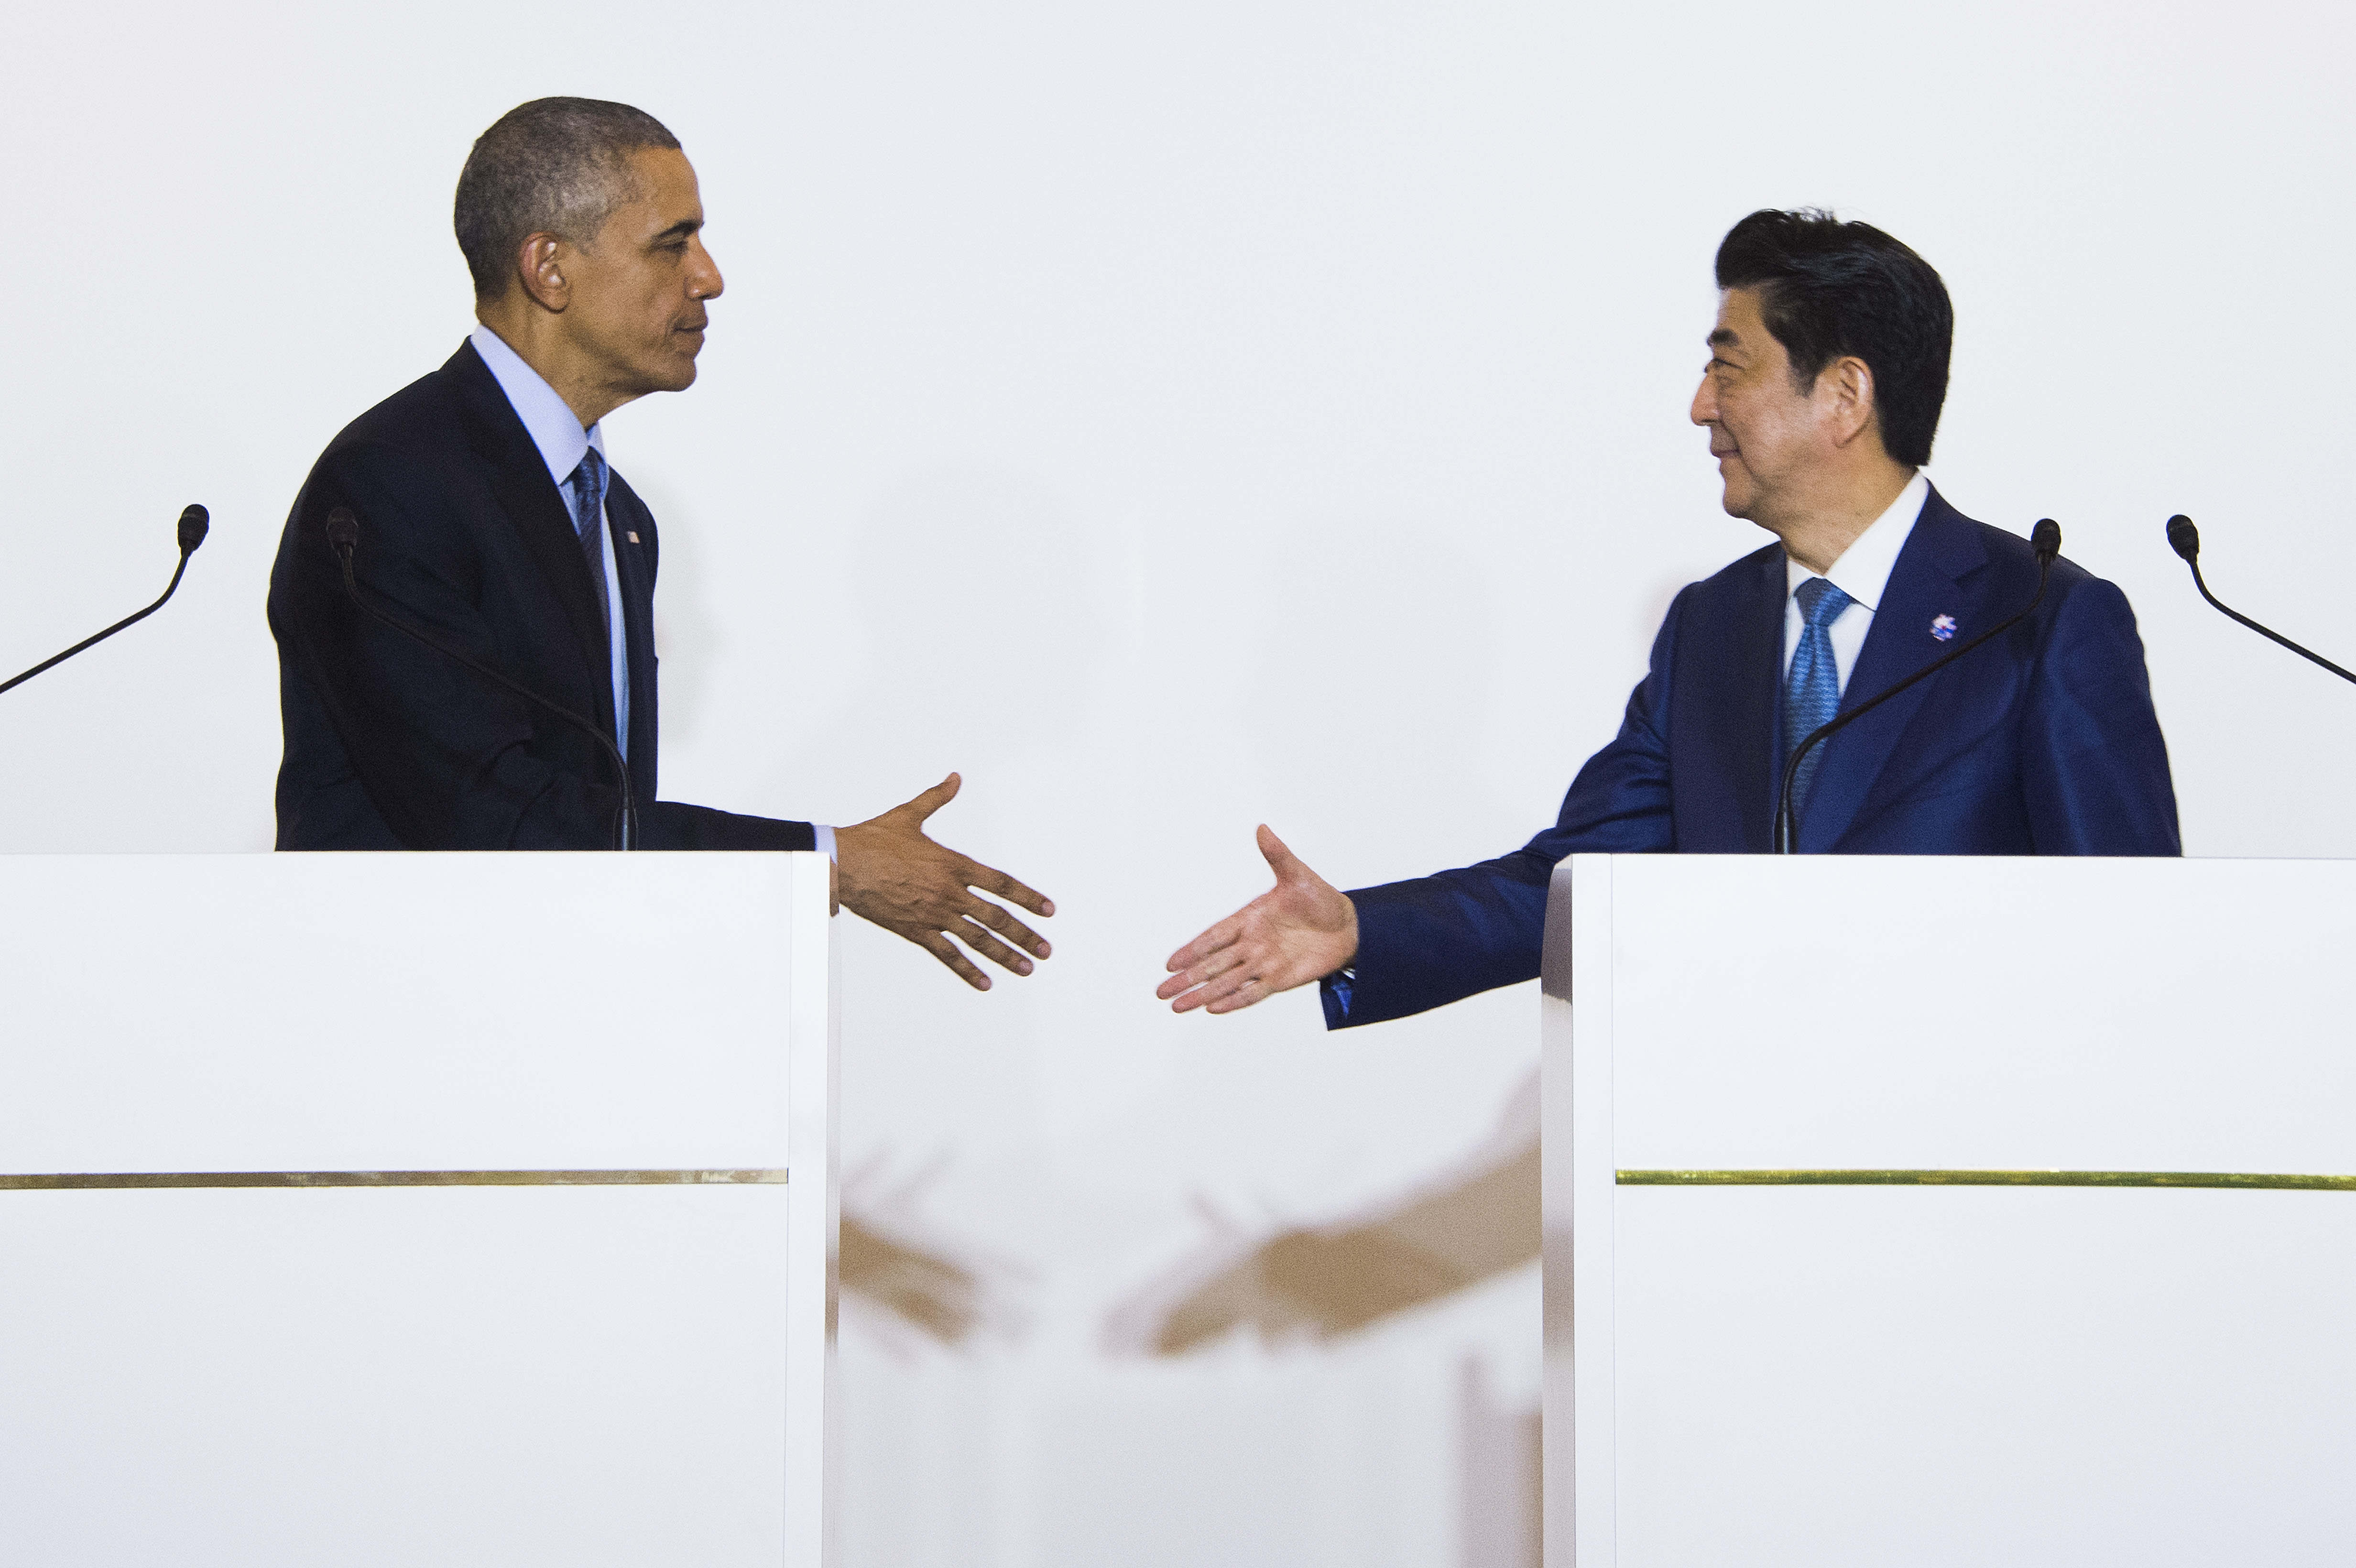 U.S. President Barack Obama and Prime Minister Shinzo Abe appear together at a news conference after meeting in Shima, Mie Prefecture, on Wednesday evening. | AFP-JIJI